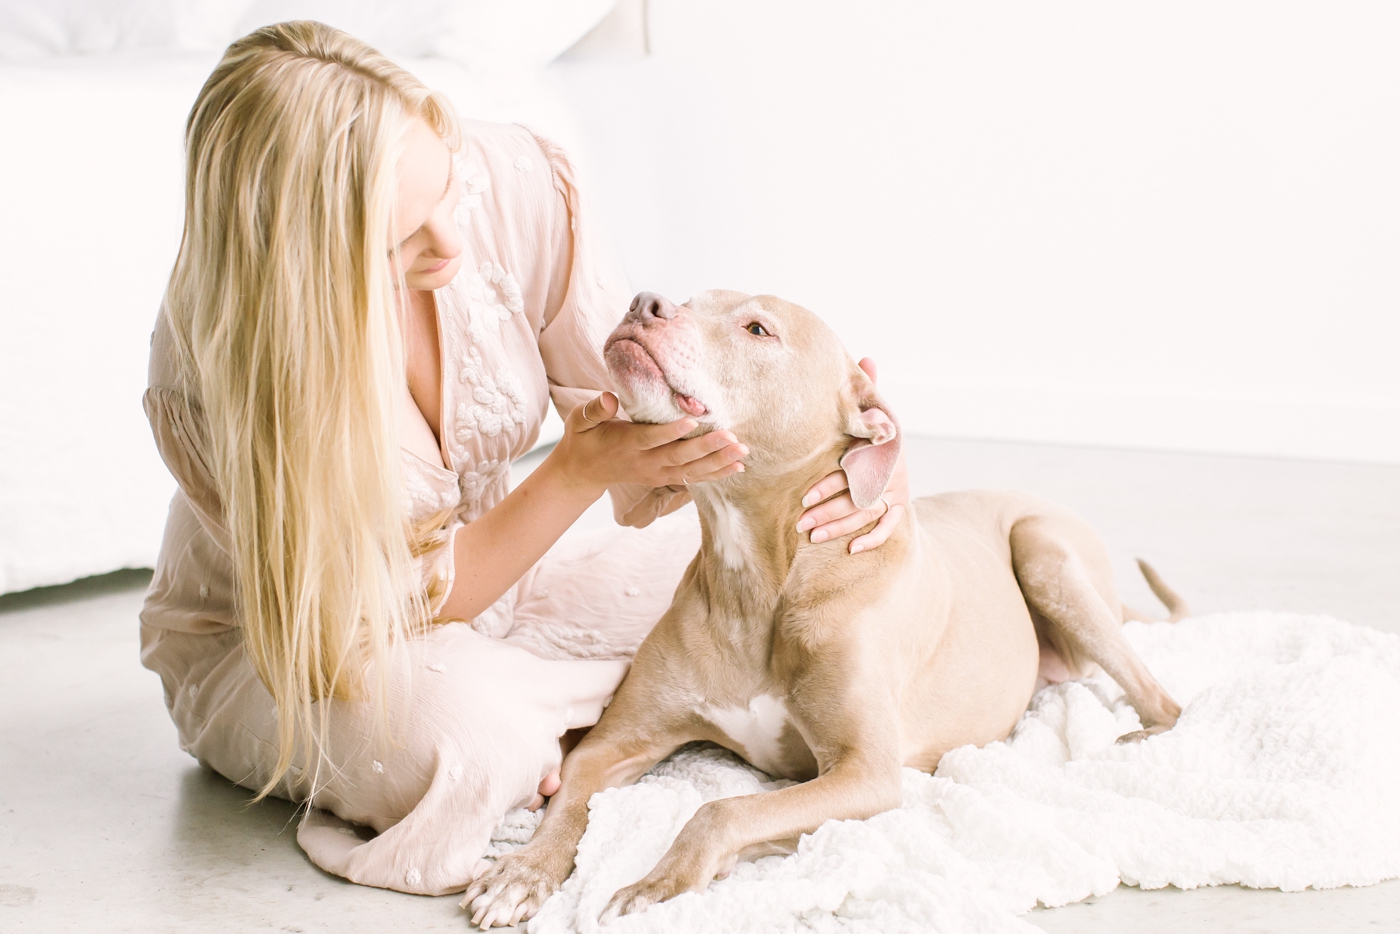 Mom petting dog during studio family session. Photo by Sana Ahmed Photography.